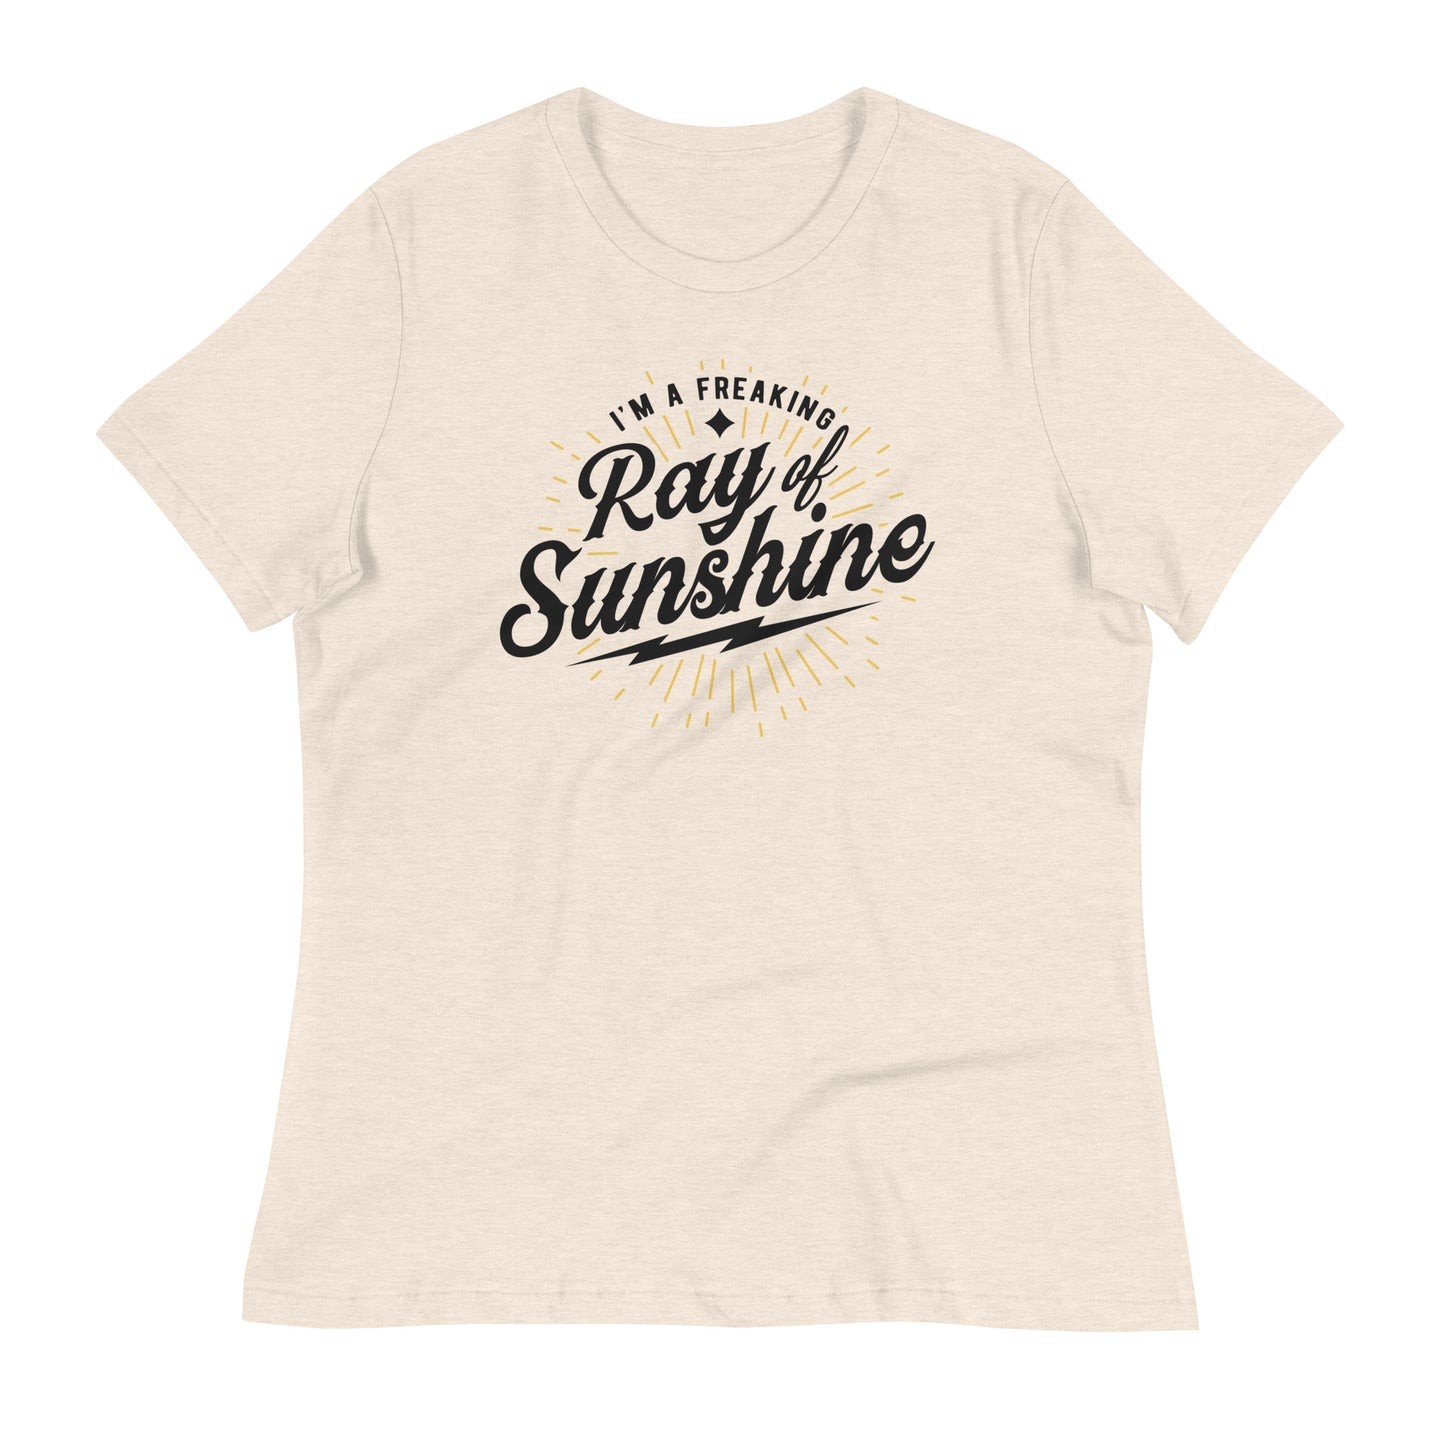 I'm a Freaking Ray of Sunshine Bella Canvas Relaxed Women's T-Shirt